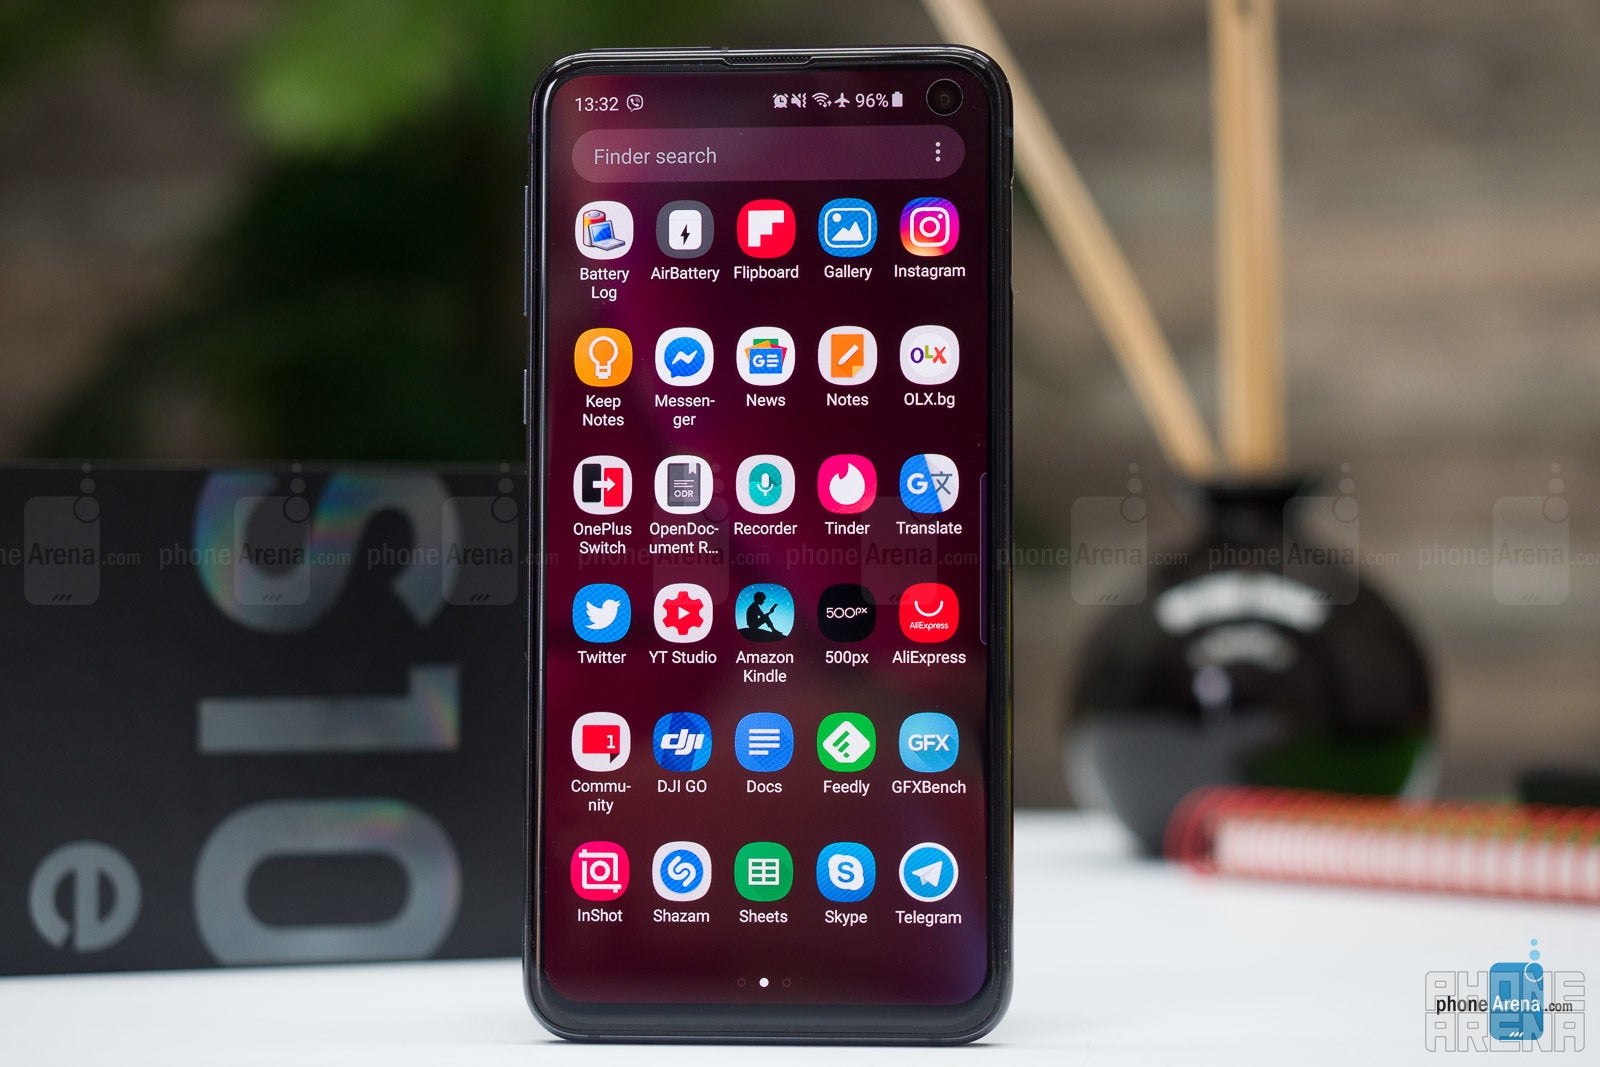 Samsung Galaxy S10e review: The best Galaxy S10 for most people